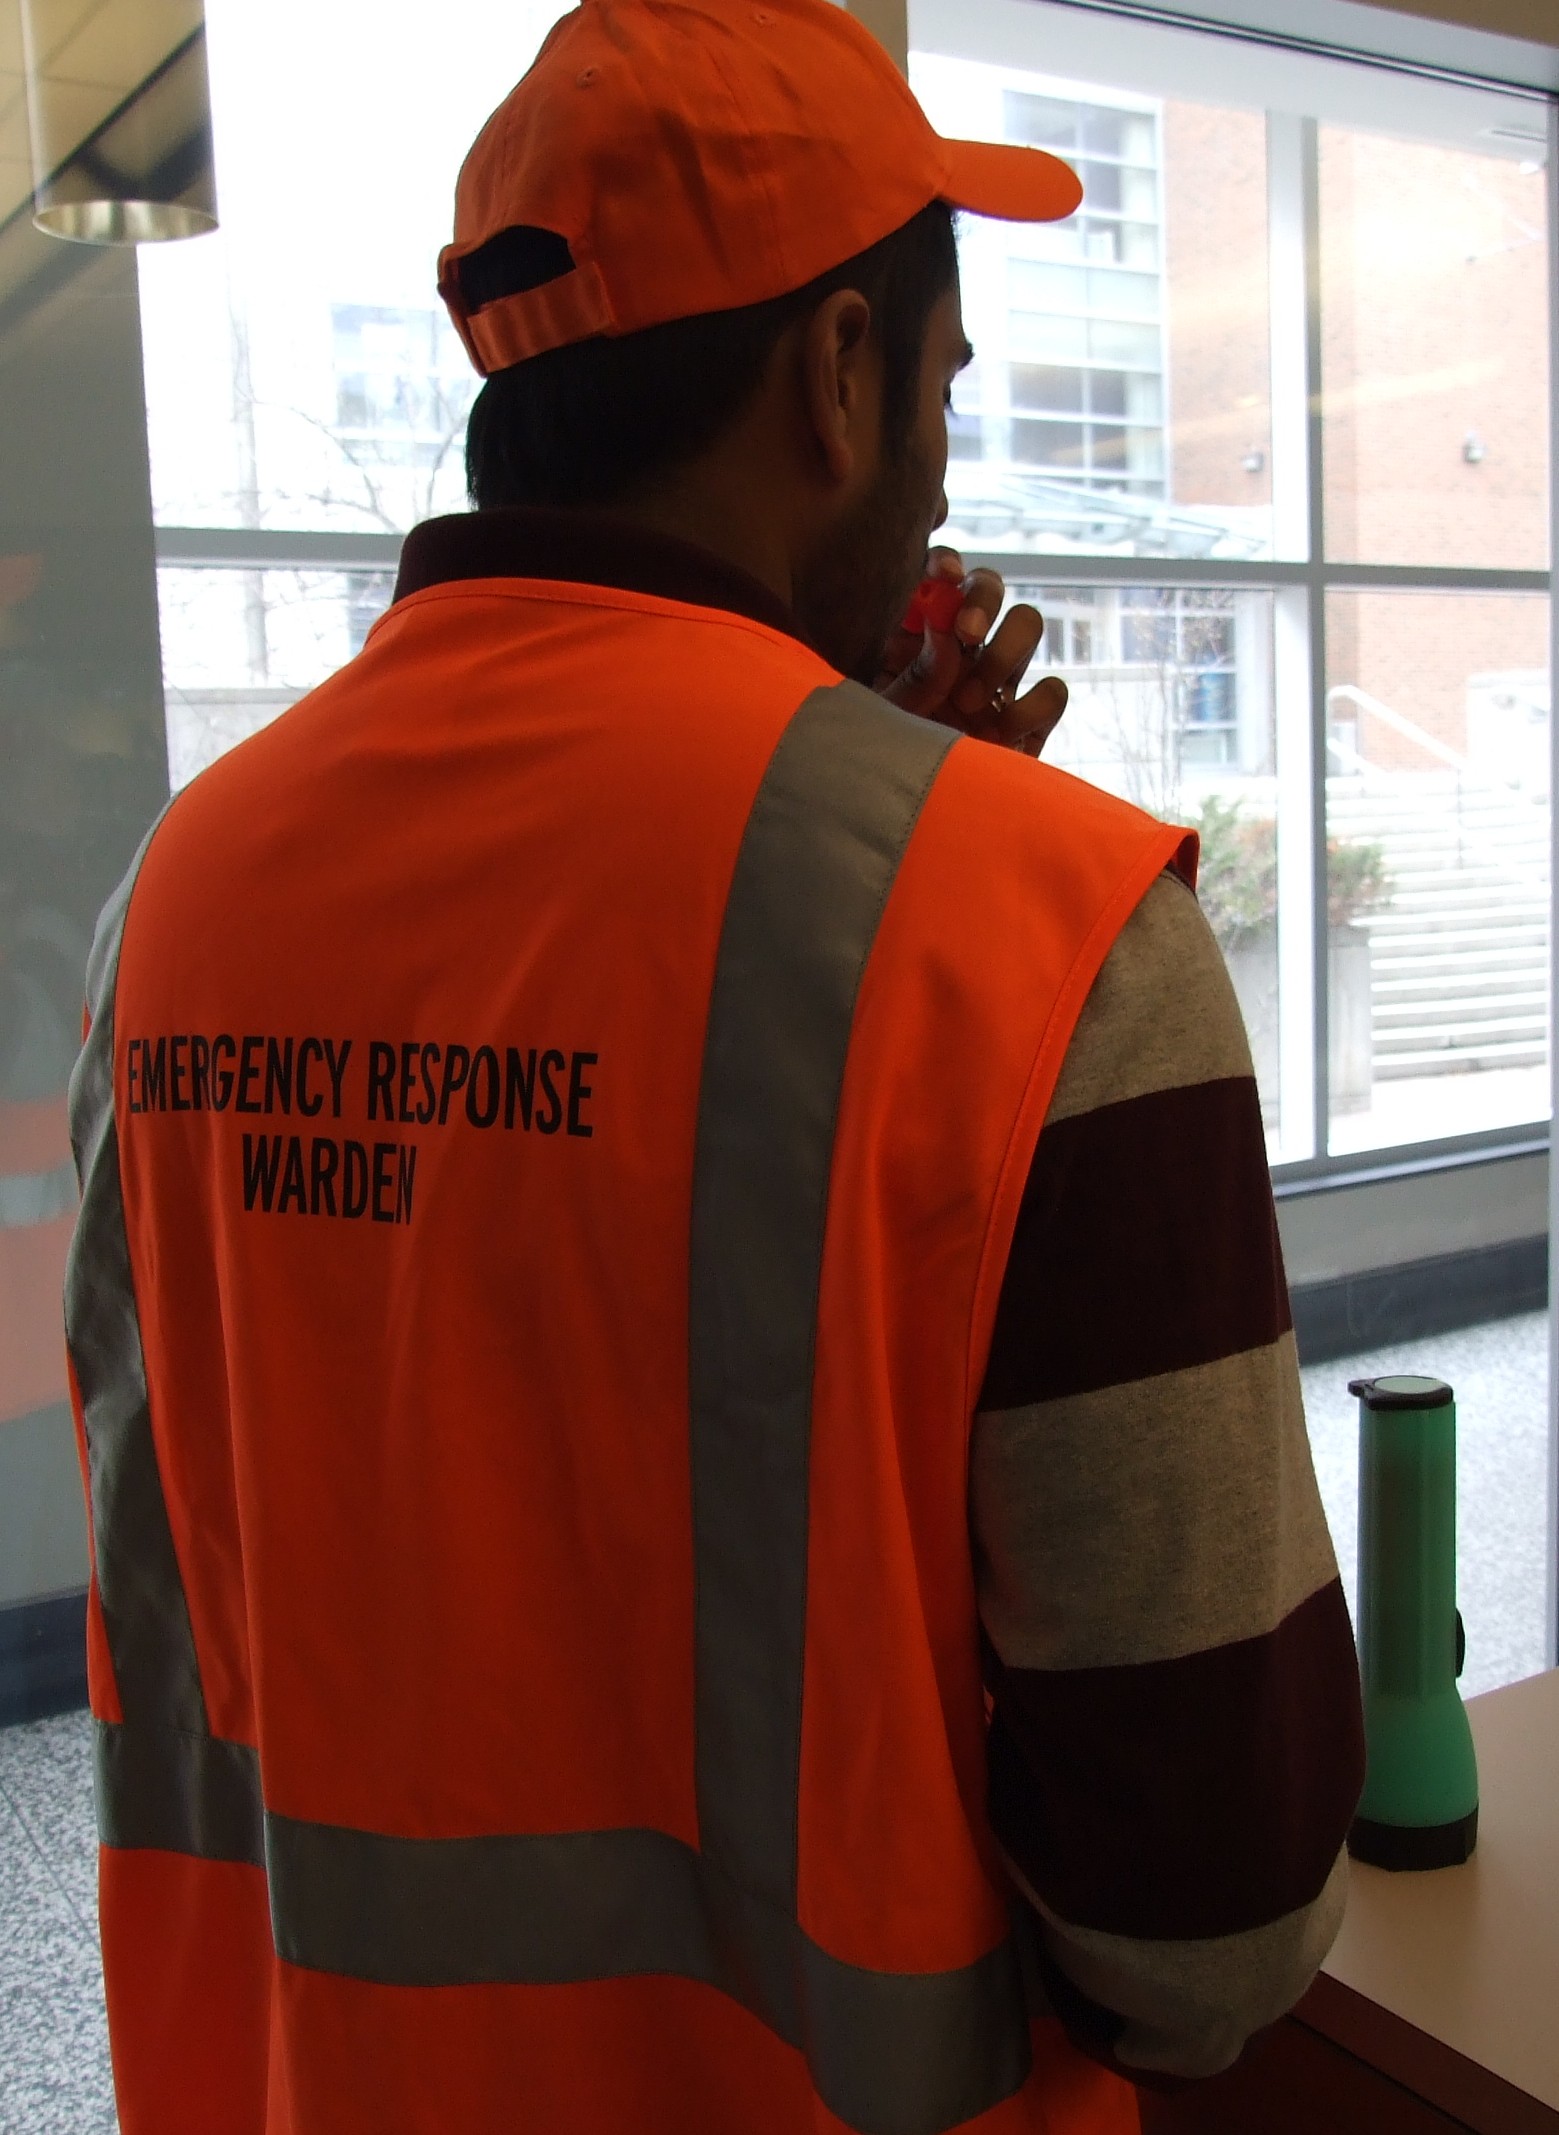 A Person with an Orange Vest Displaying Emergency Response Warden blowing a whistle